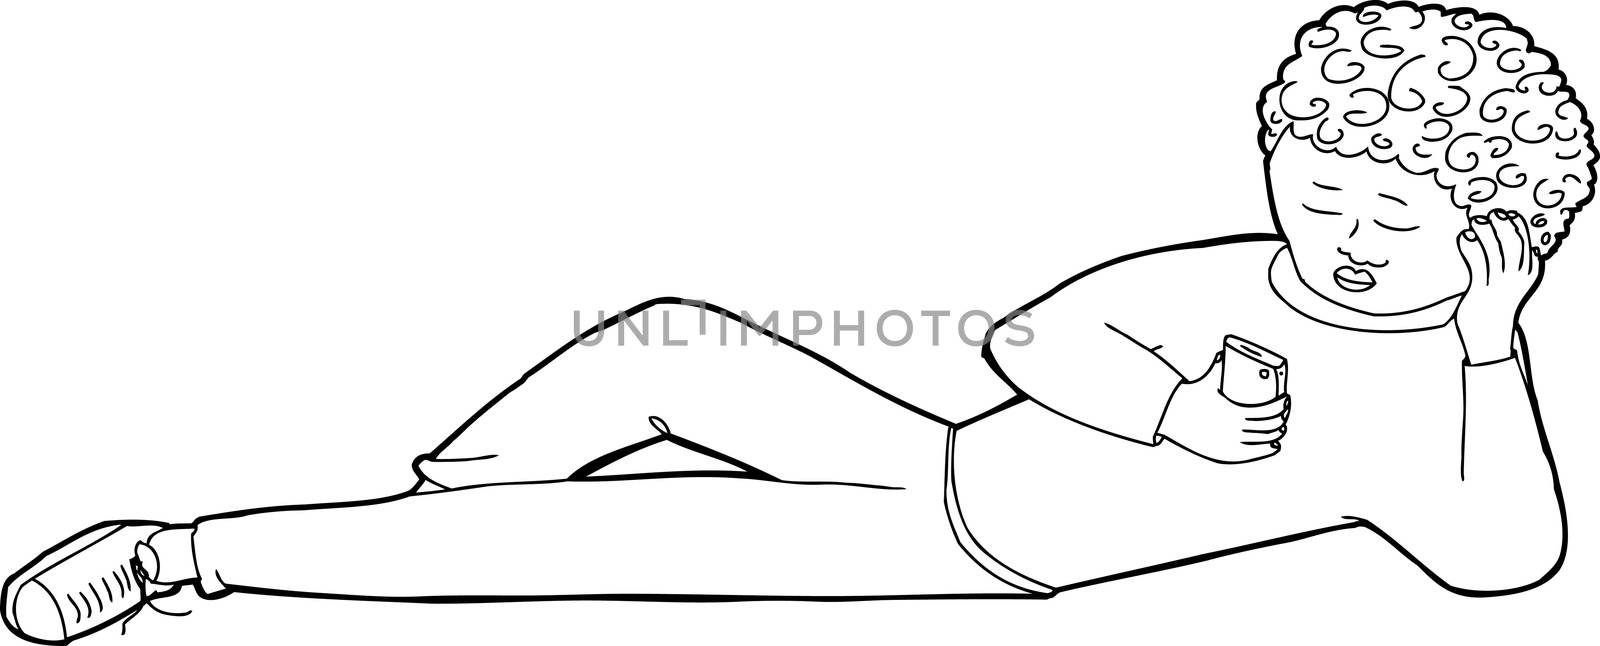 Black outline drawing of youth holding cell phone